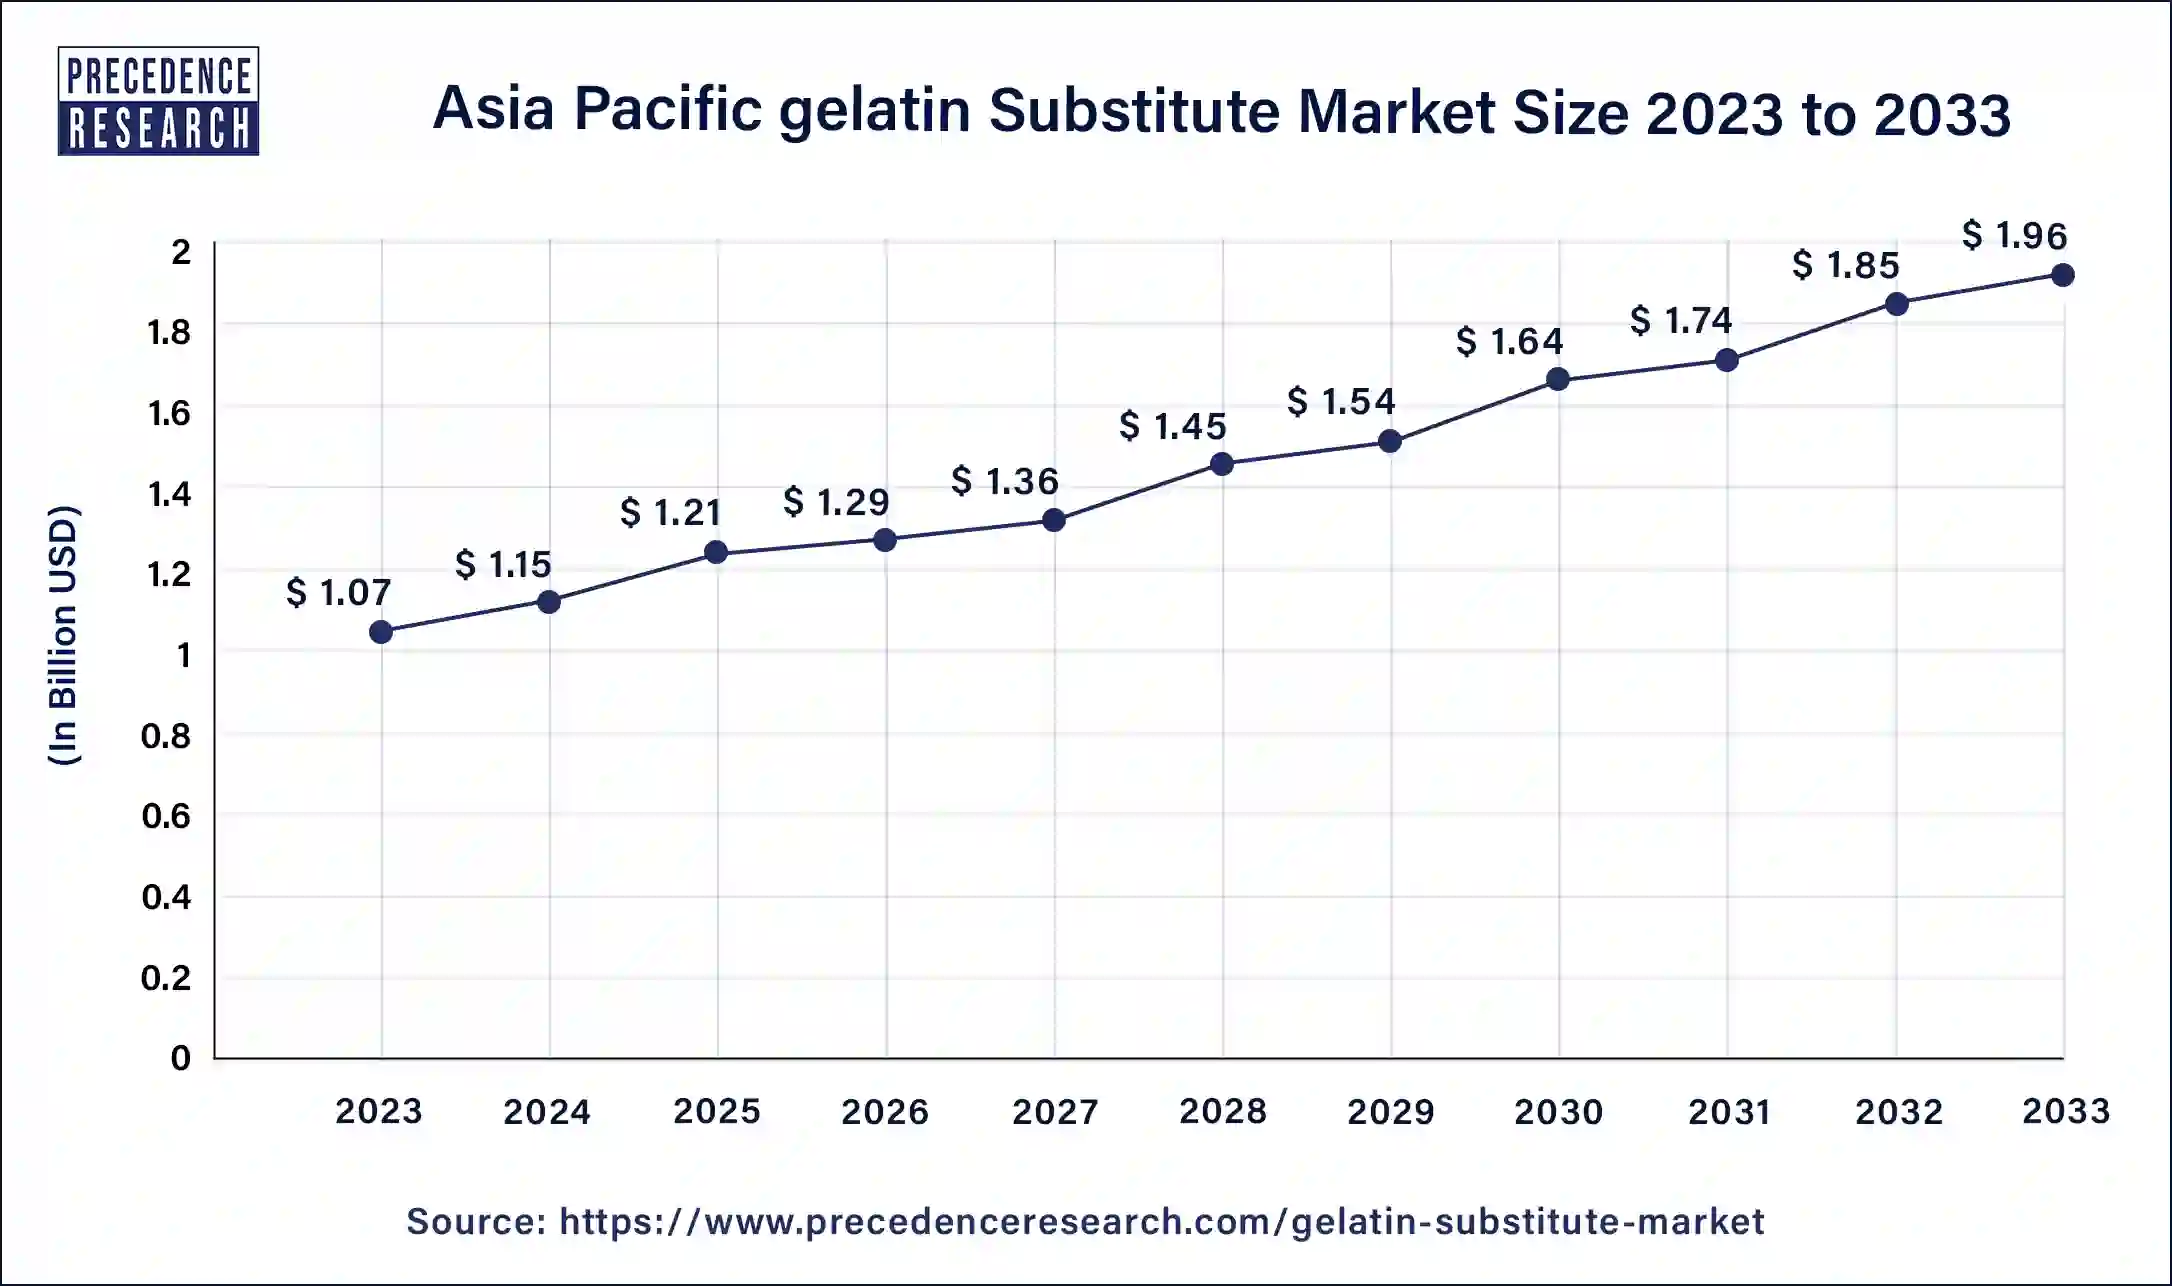 Asia Pacific Gelatin Substitute Market Size 2024 to 2033